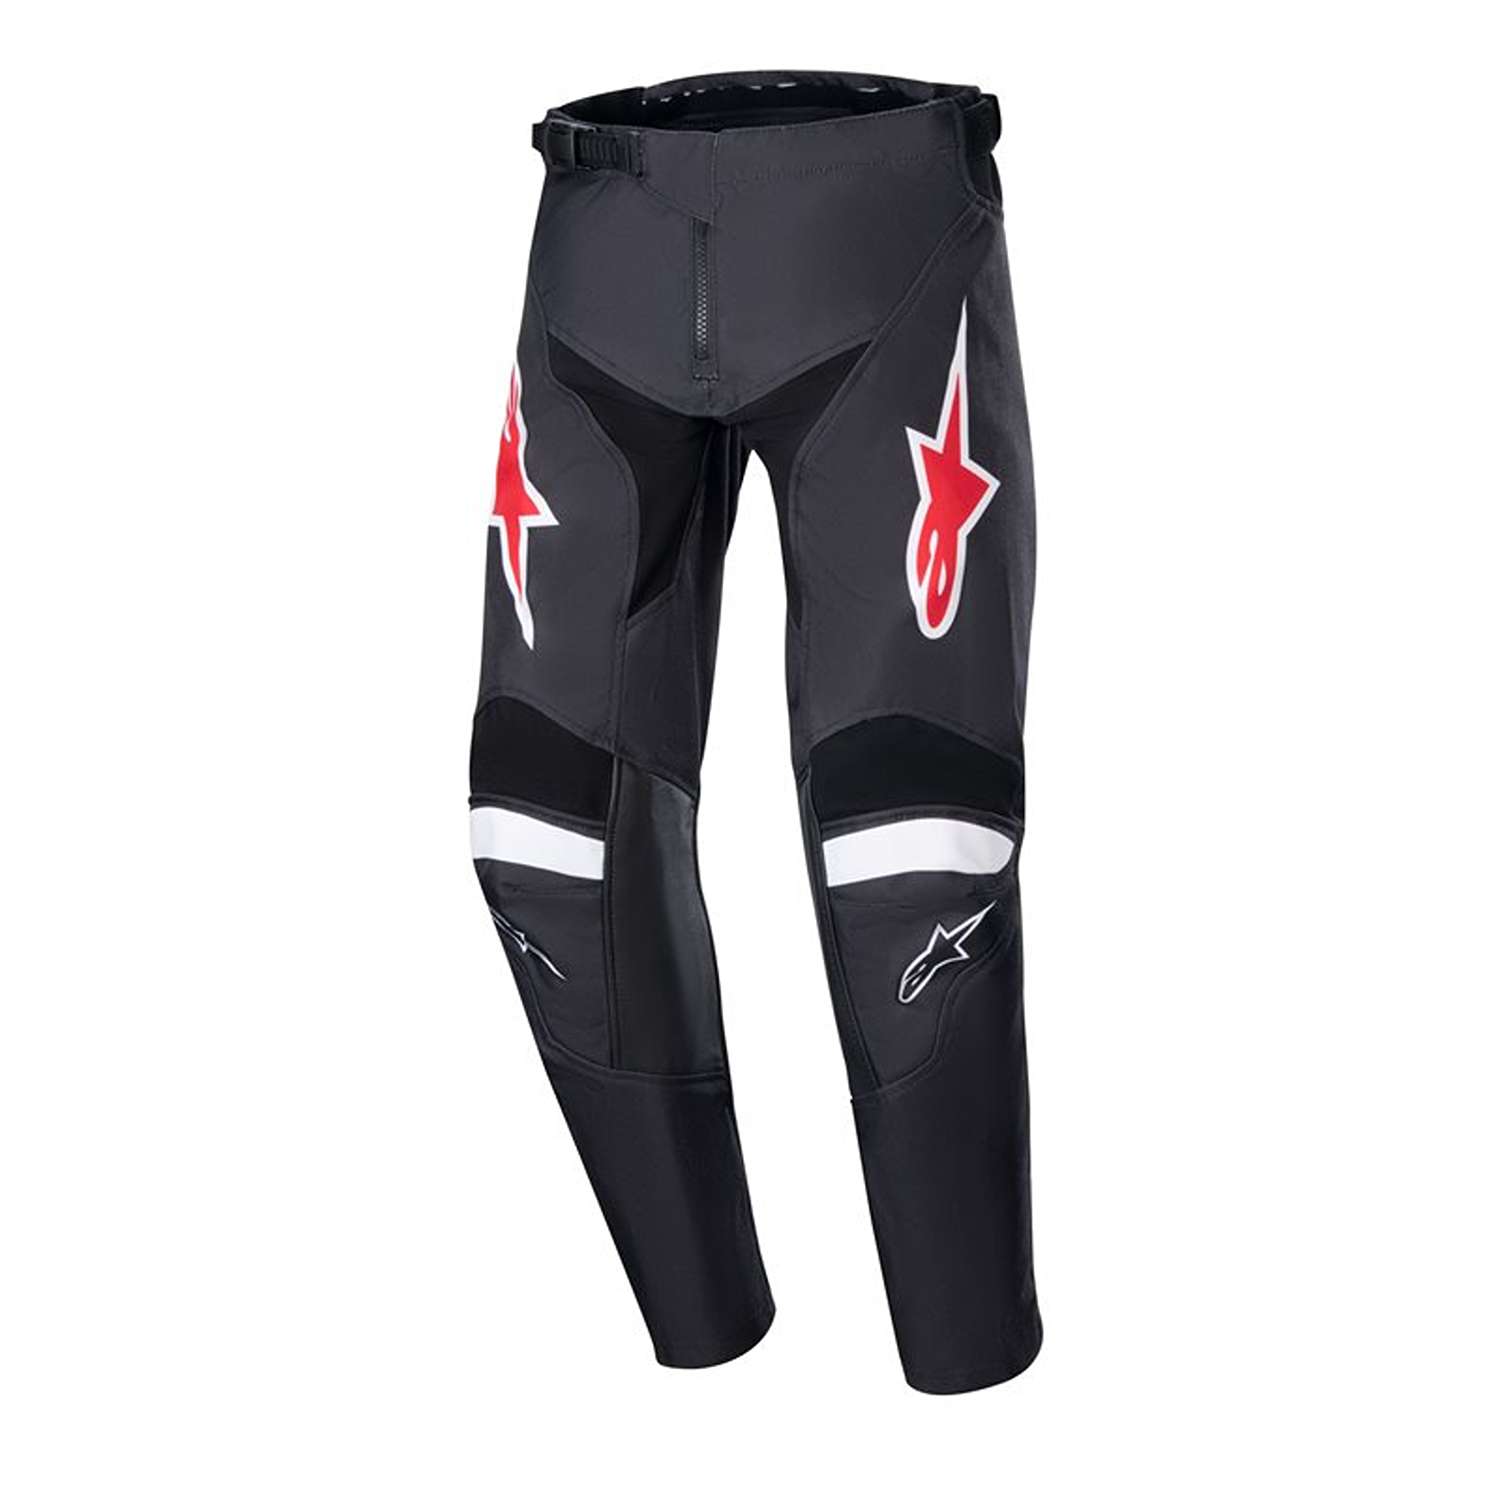 Image of Alpinestars Youth Racer Lucent Pants Black White Talla 28